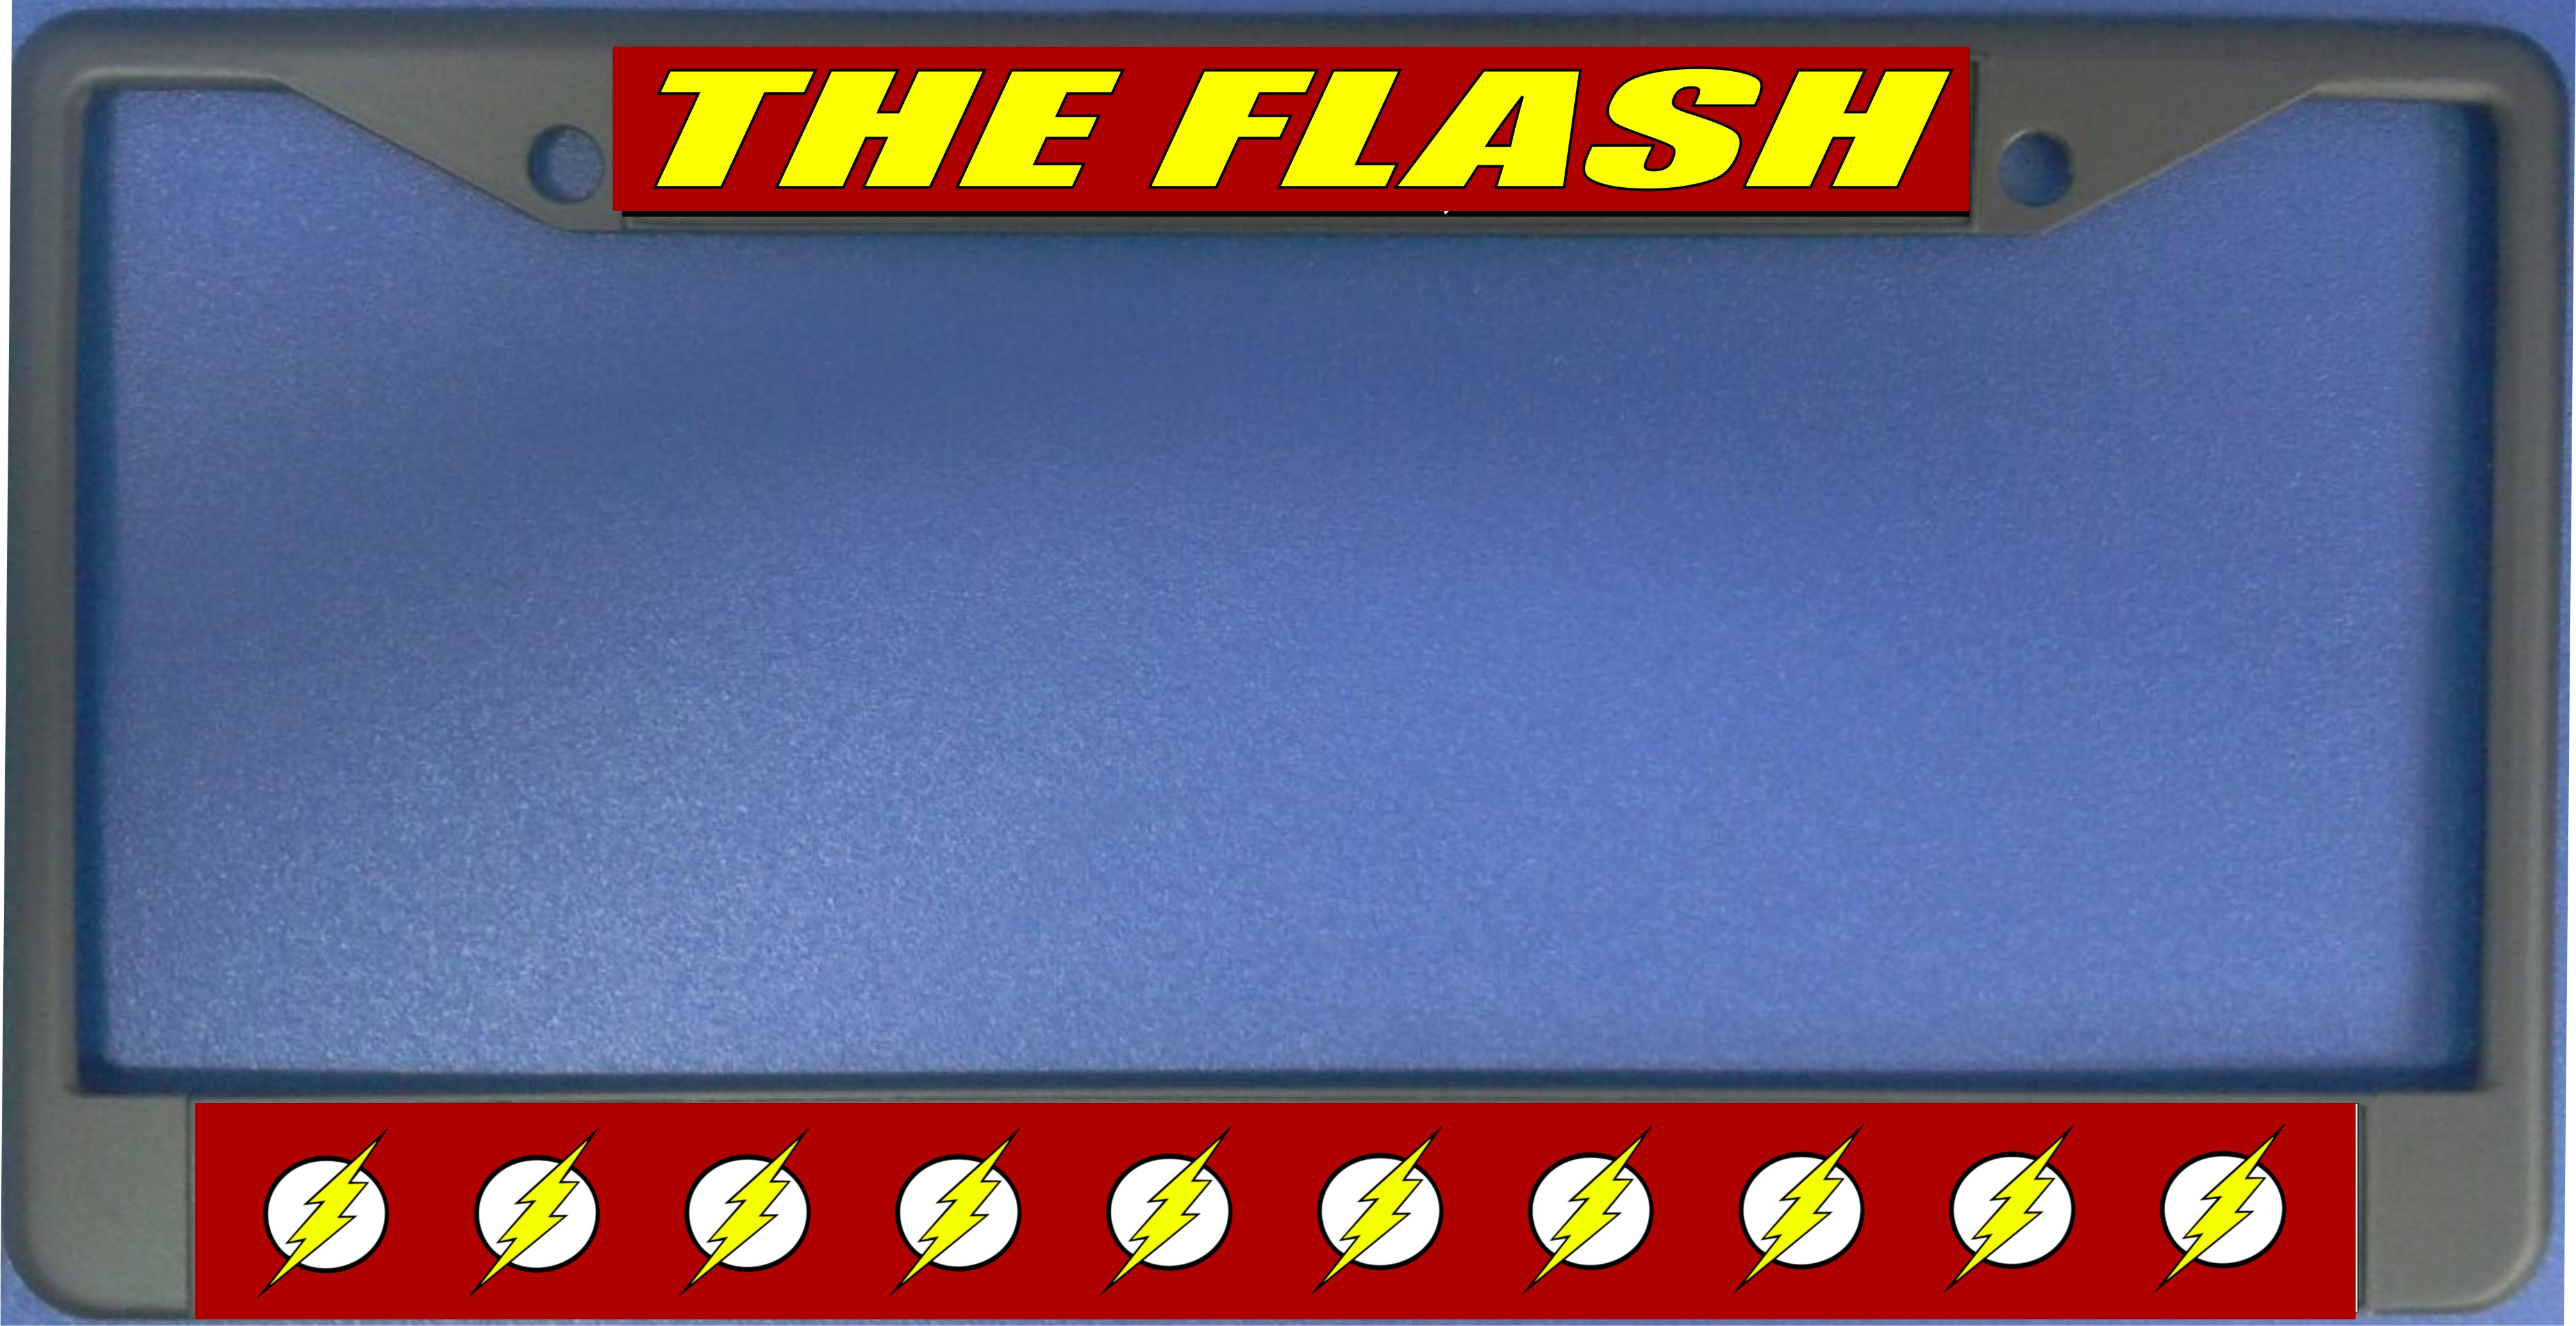 The Flash Photo LICENSE PLATE Frame  Free Screw Caps with this Frame